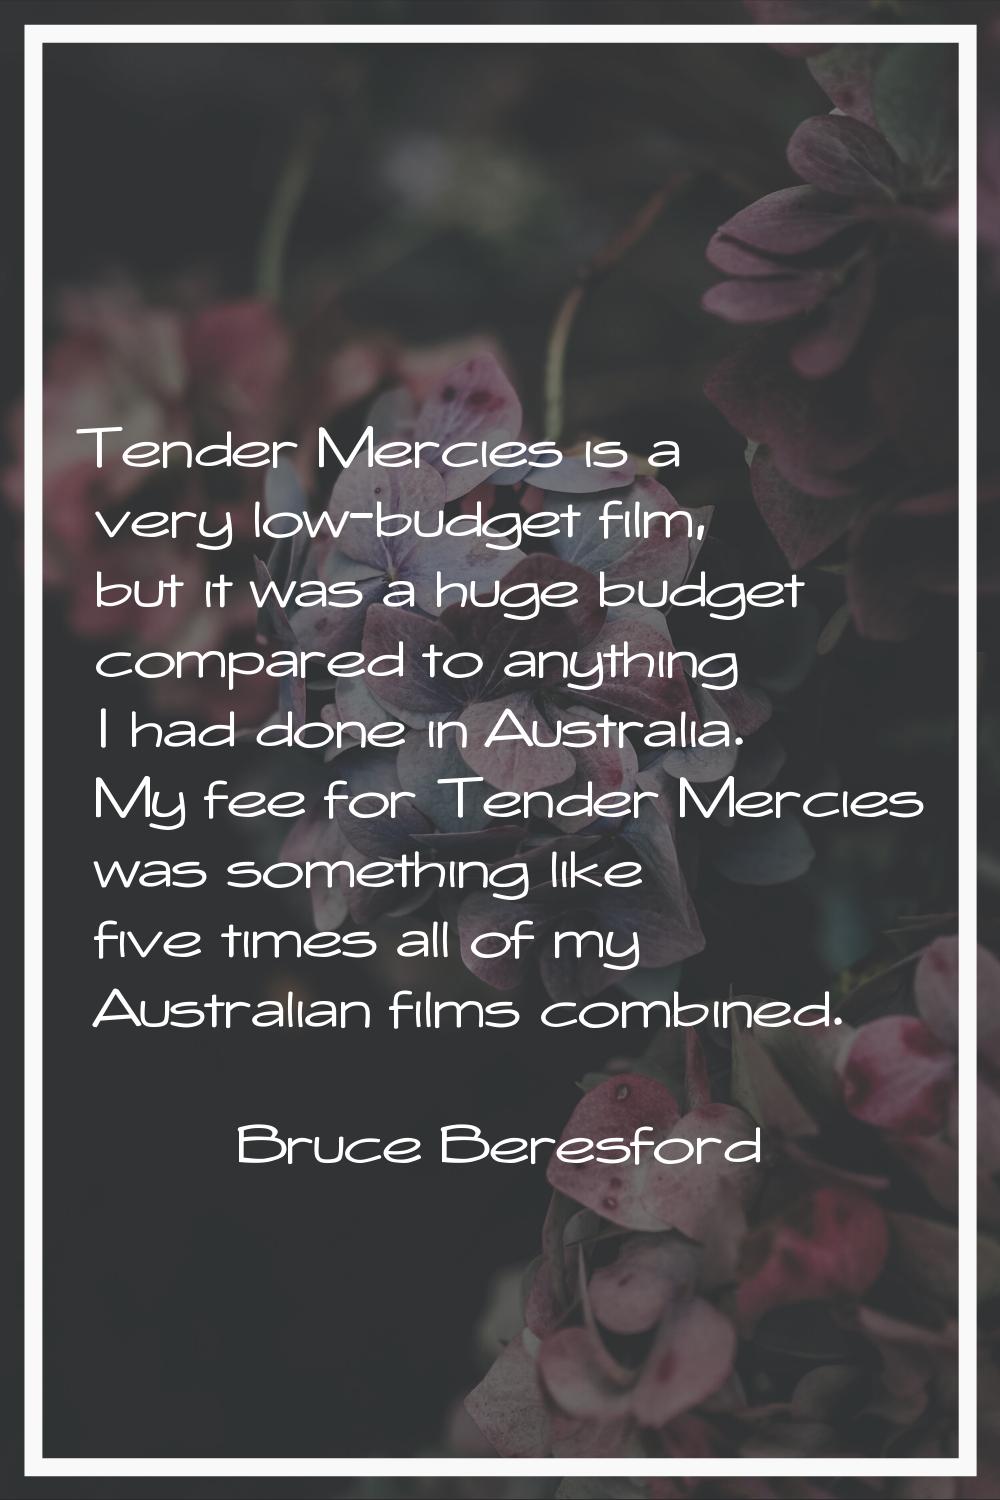 Tender Mercies is a very low-budget film, but it was a huge budget compared to anything I had done 